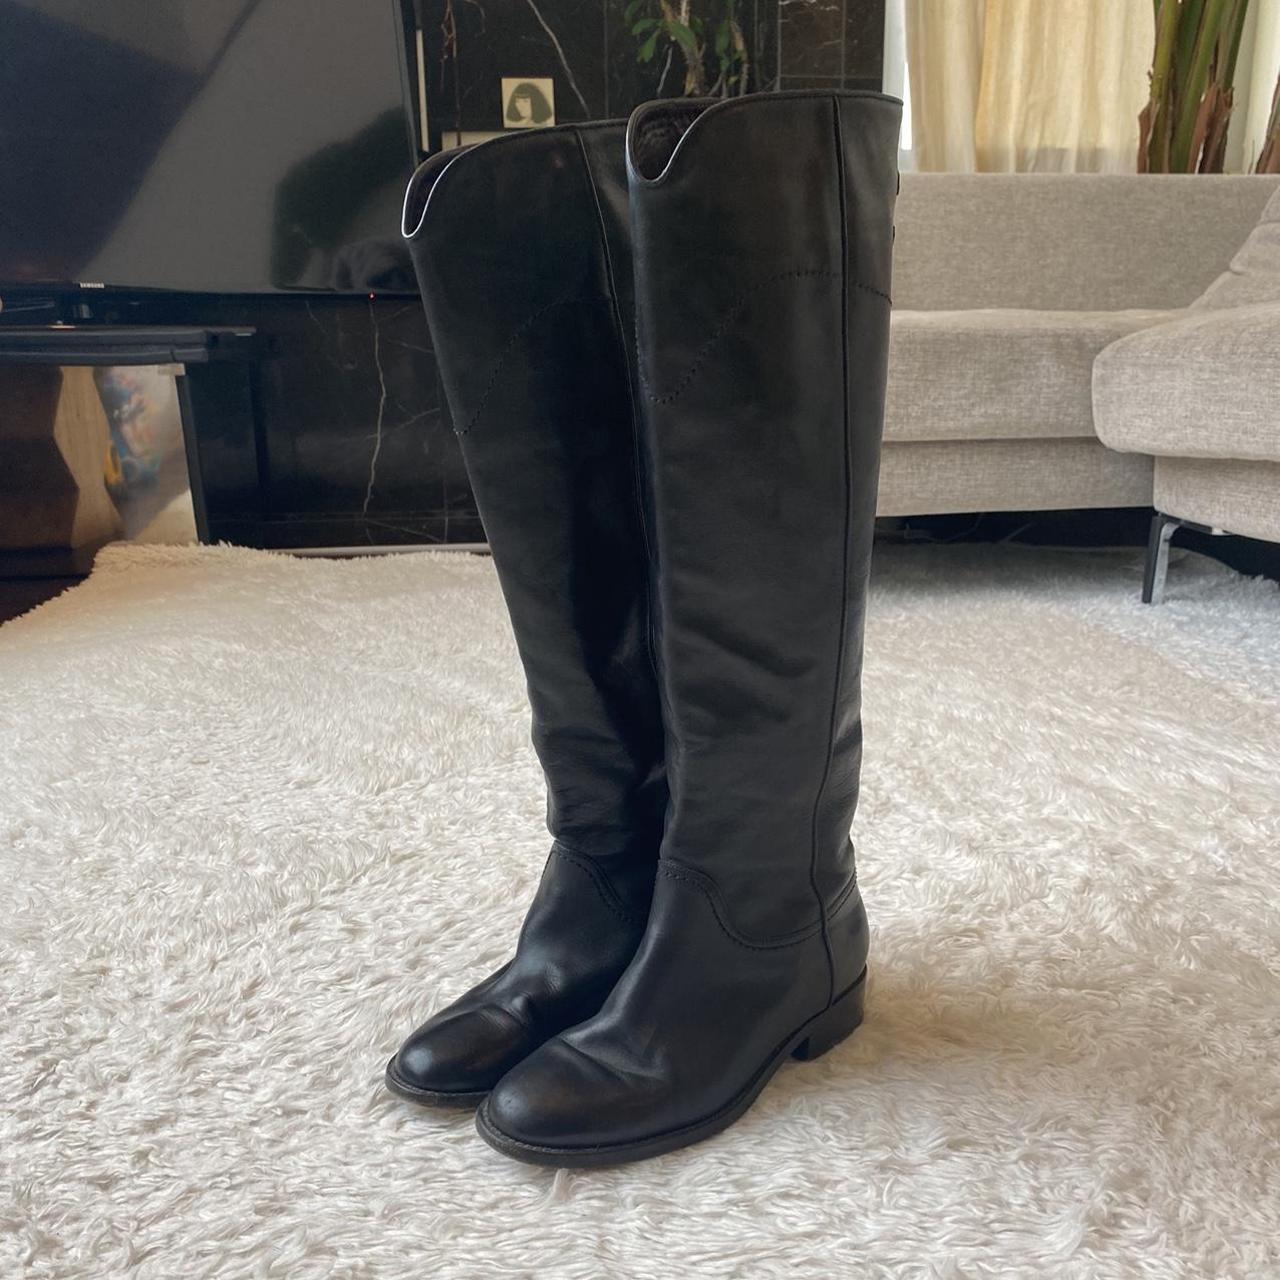 Beautiful classic Chanel knee high boots in black